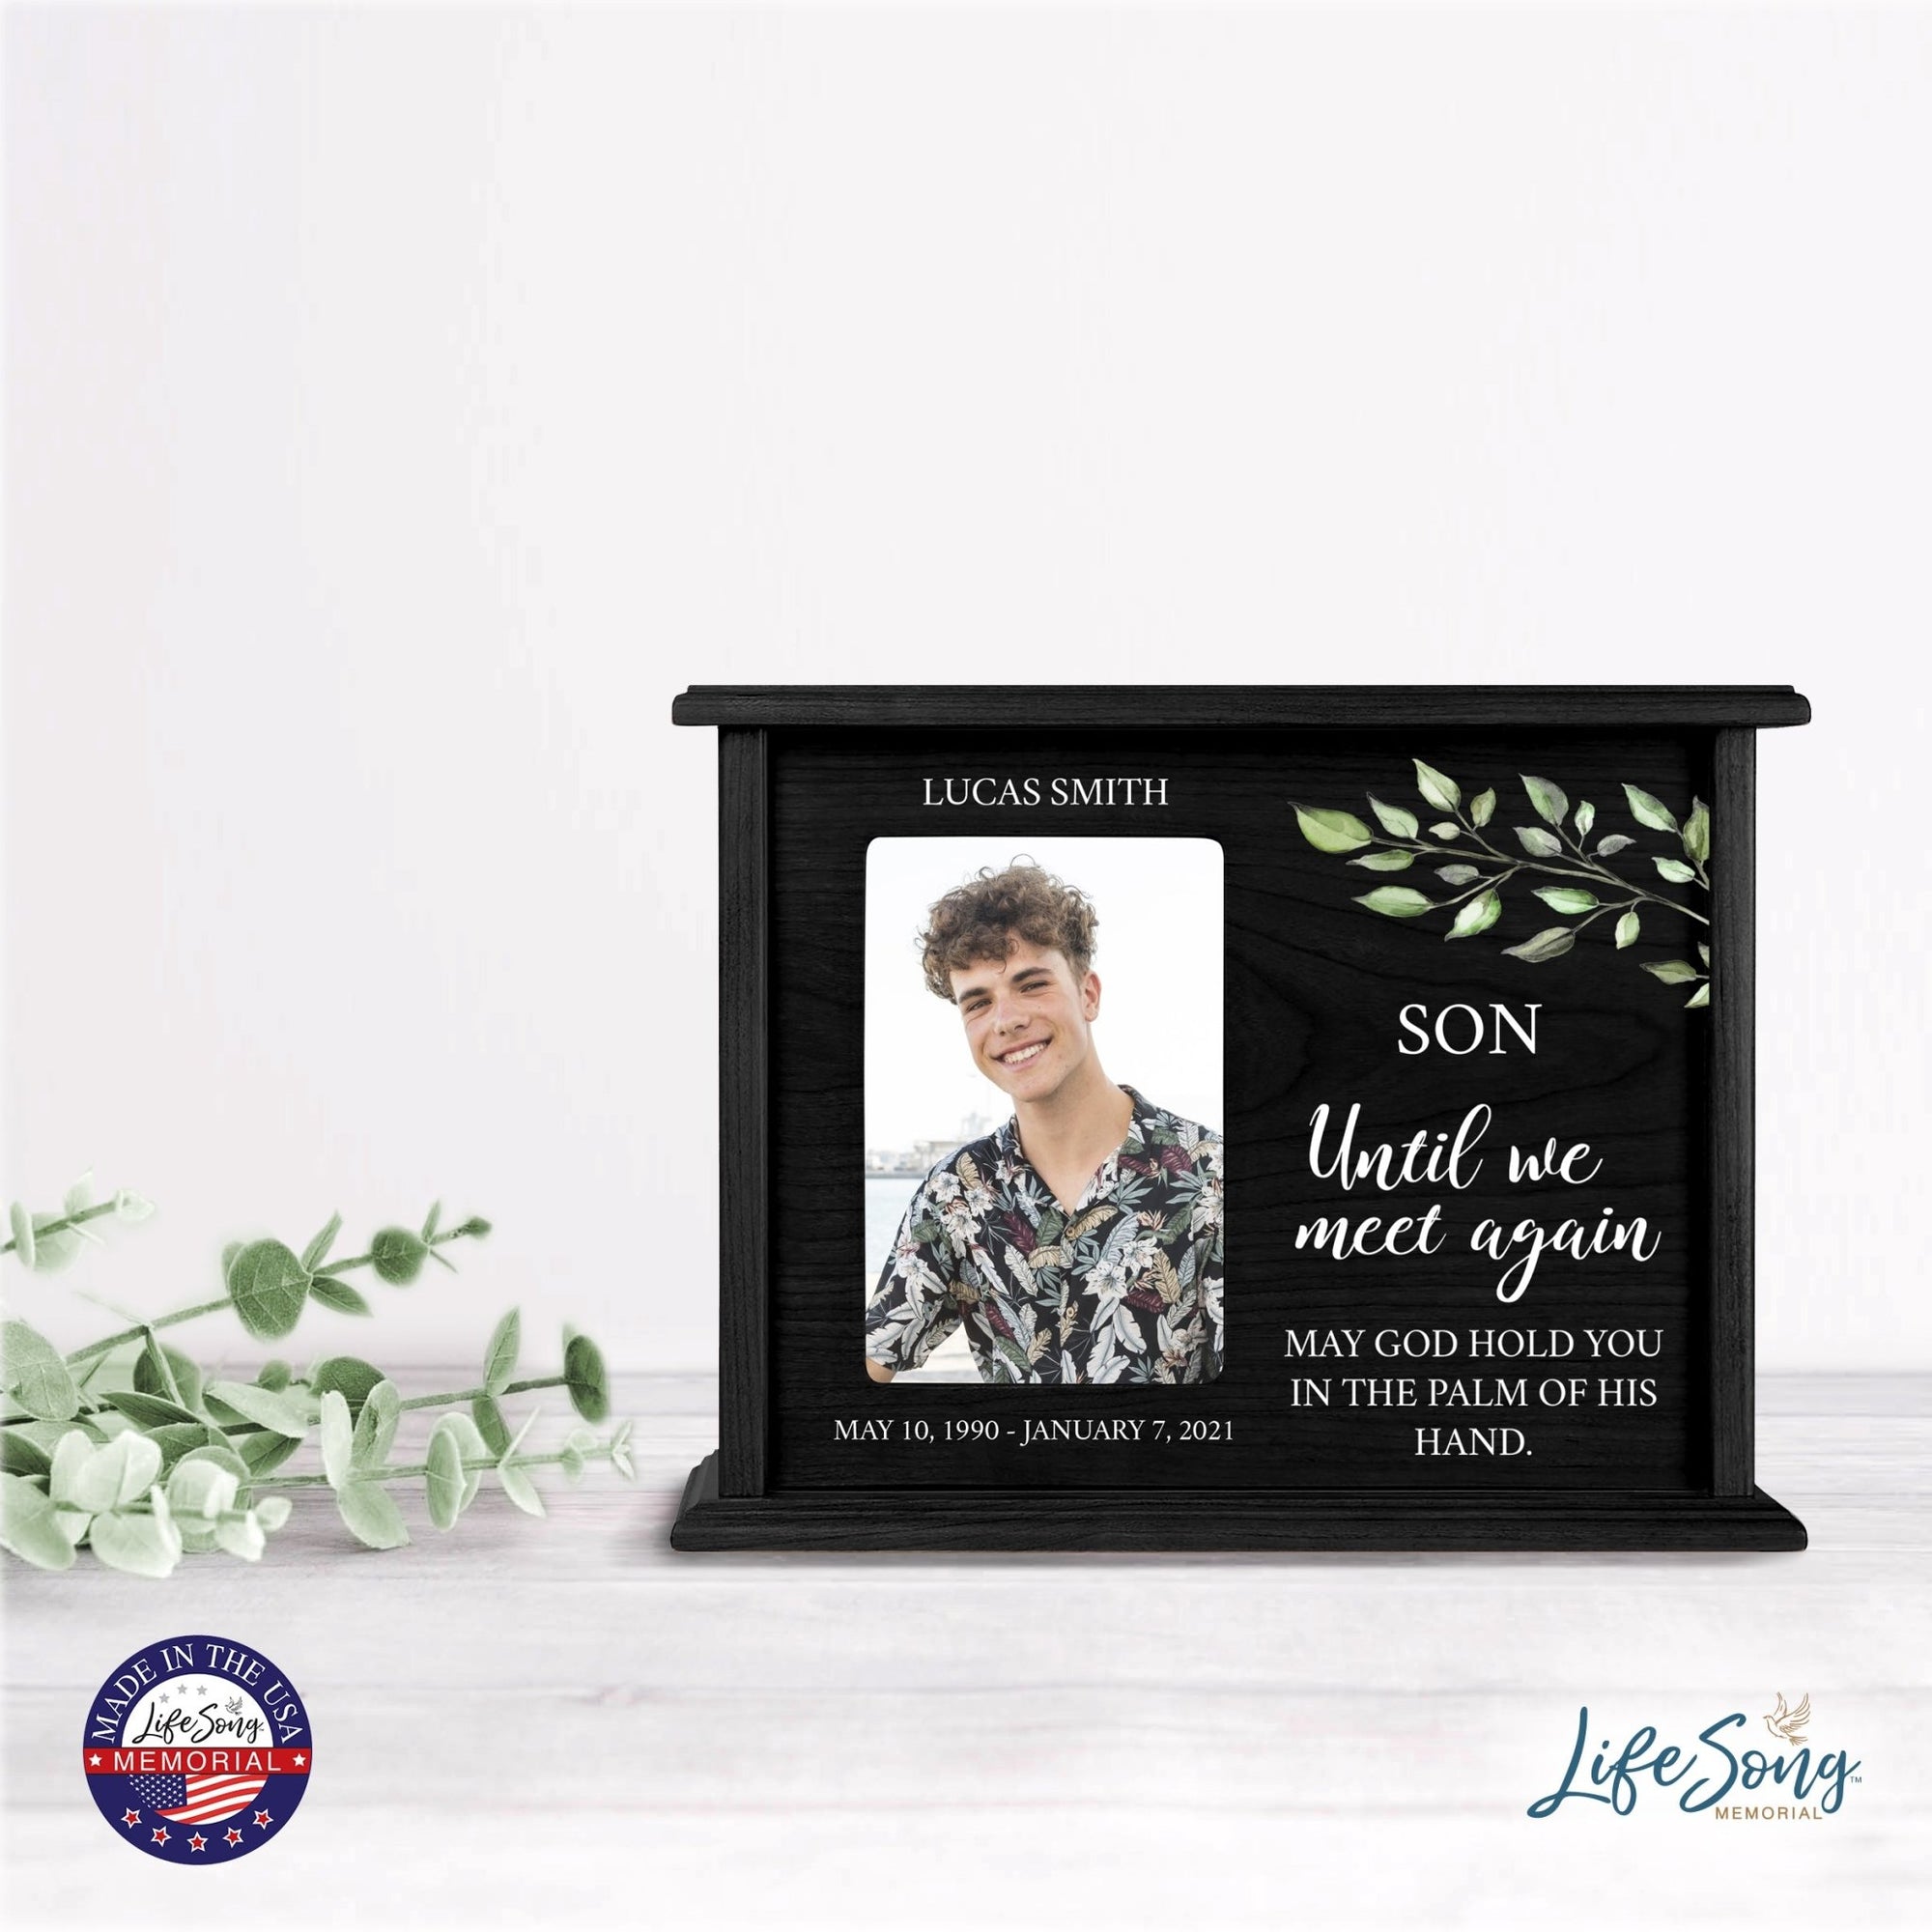 Personalized Memorial Cherry Wood 12 x 4.5 x 9 Cremation Urn Box with Picture Frame holds 200 cu in of Human Ashes and 4x6 Photo - Until We Meet Again (Black) - LifeSong Milestones